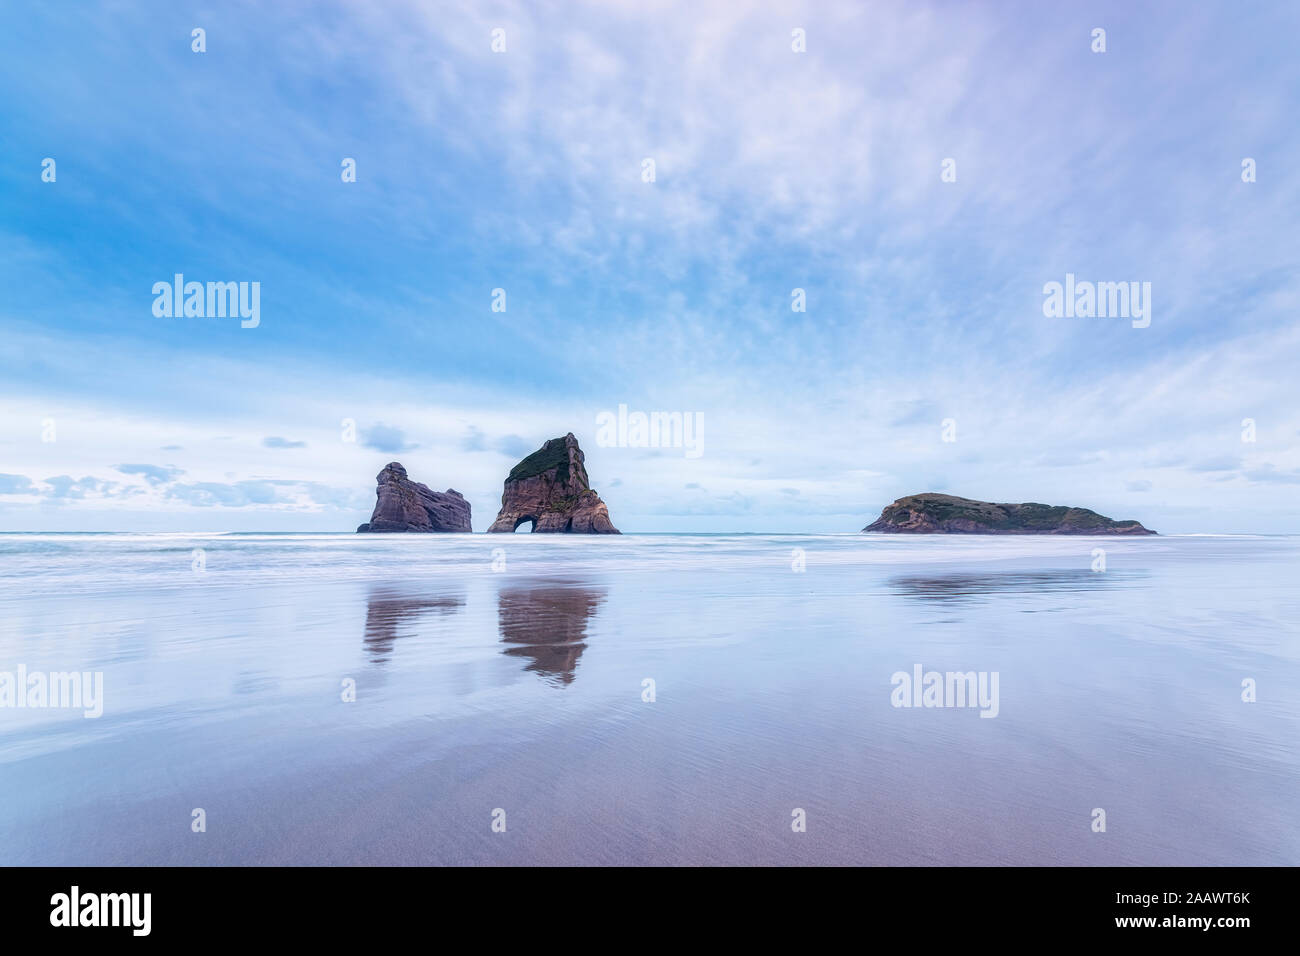 New Zealand, South Island, Wharariki Beach, Archway Islands, rock formations in sea Stock Photo